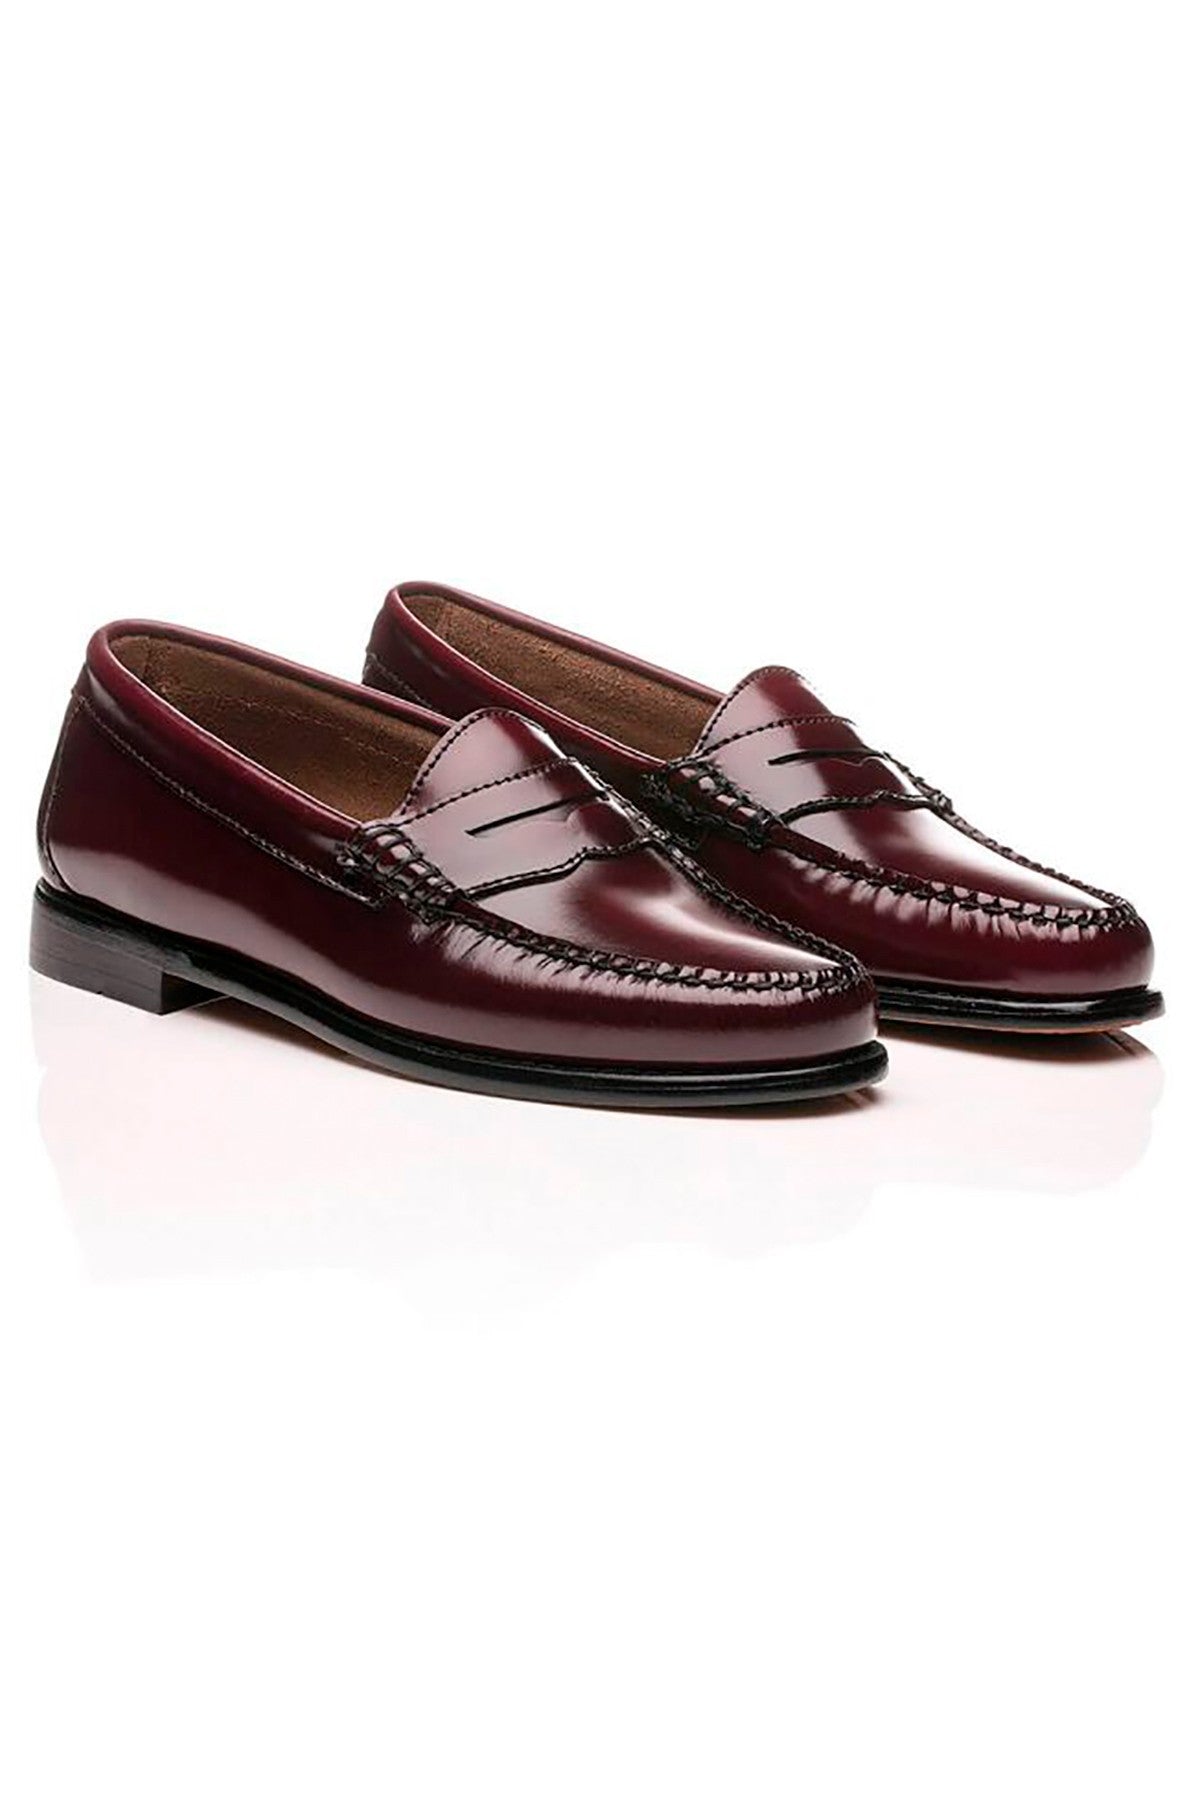 WEEJUN II Penny Shoes - Wine with Rubber Sole